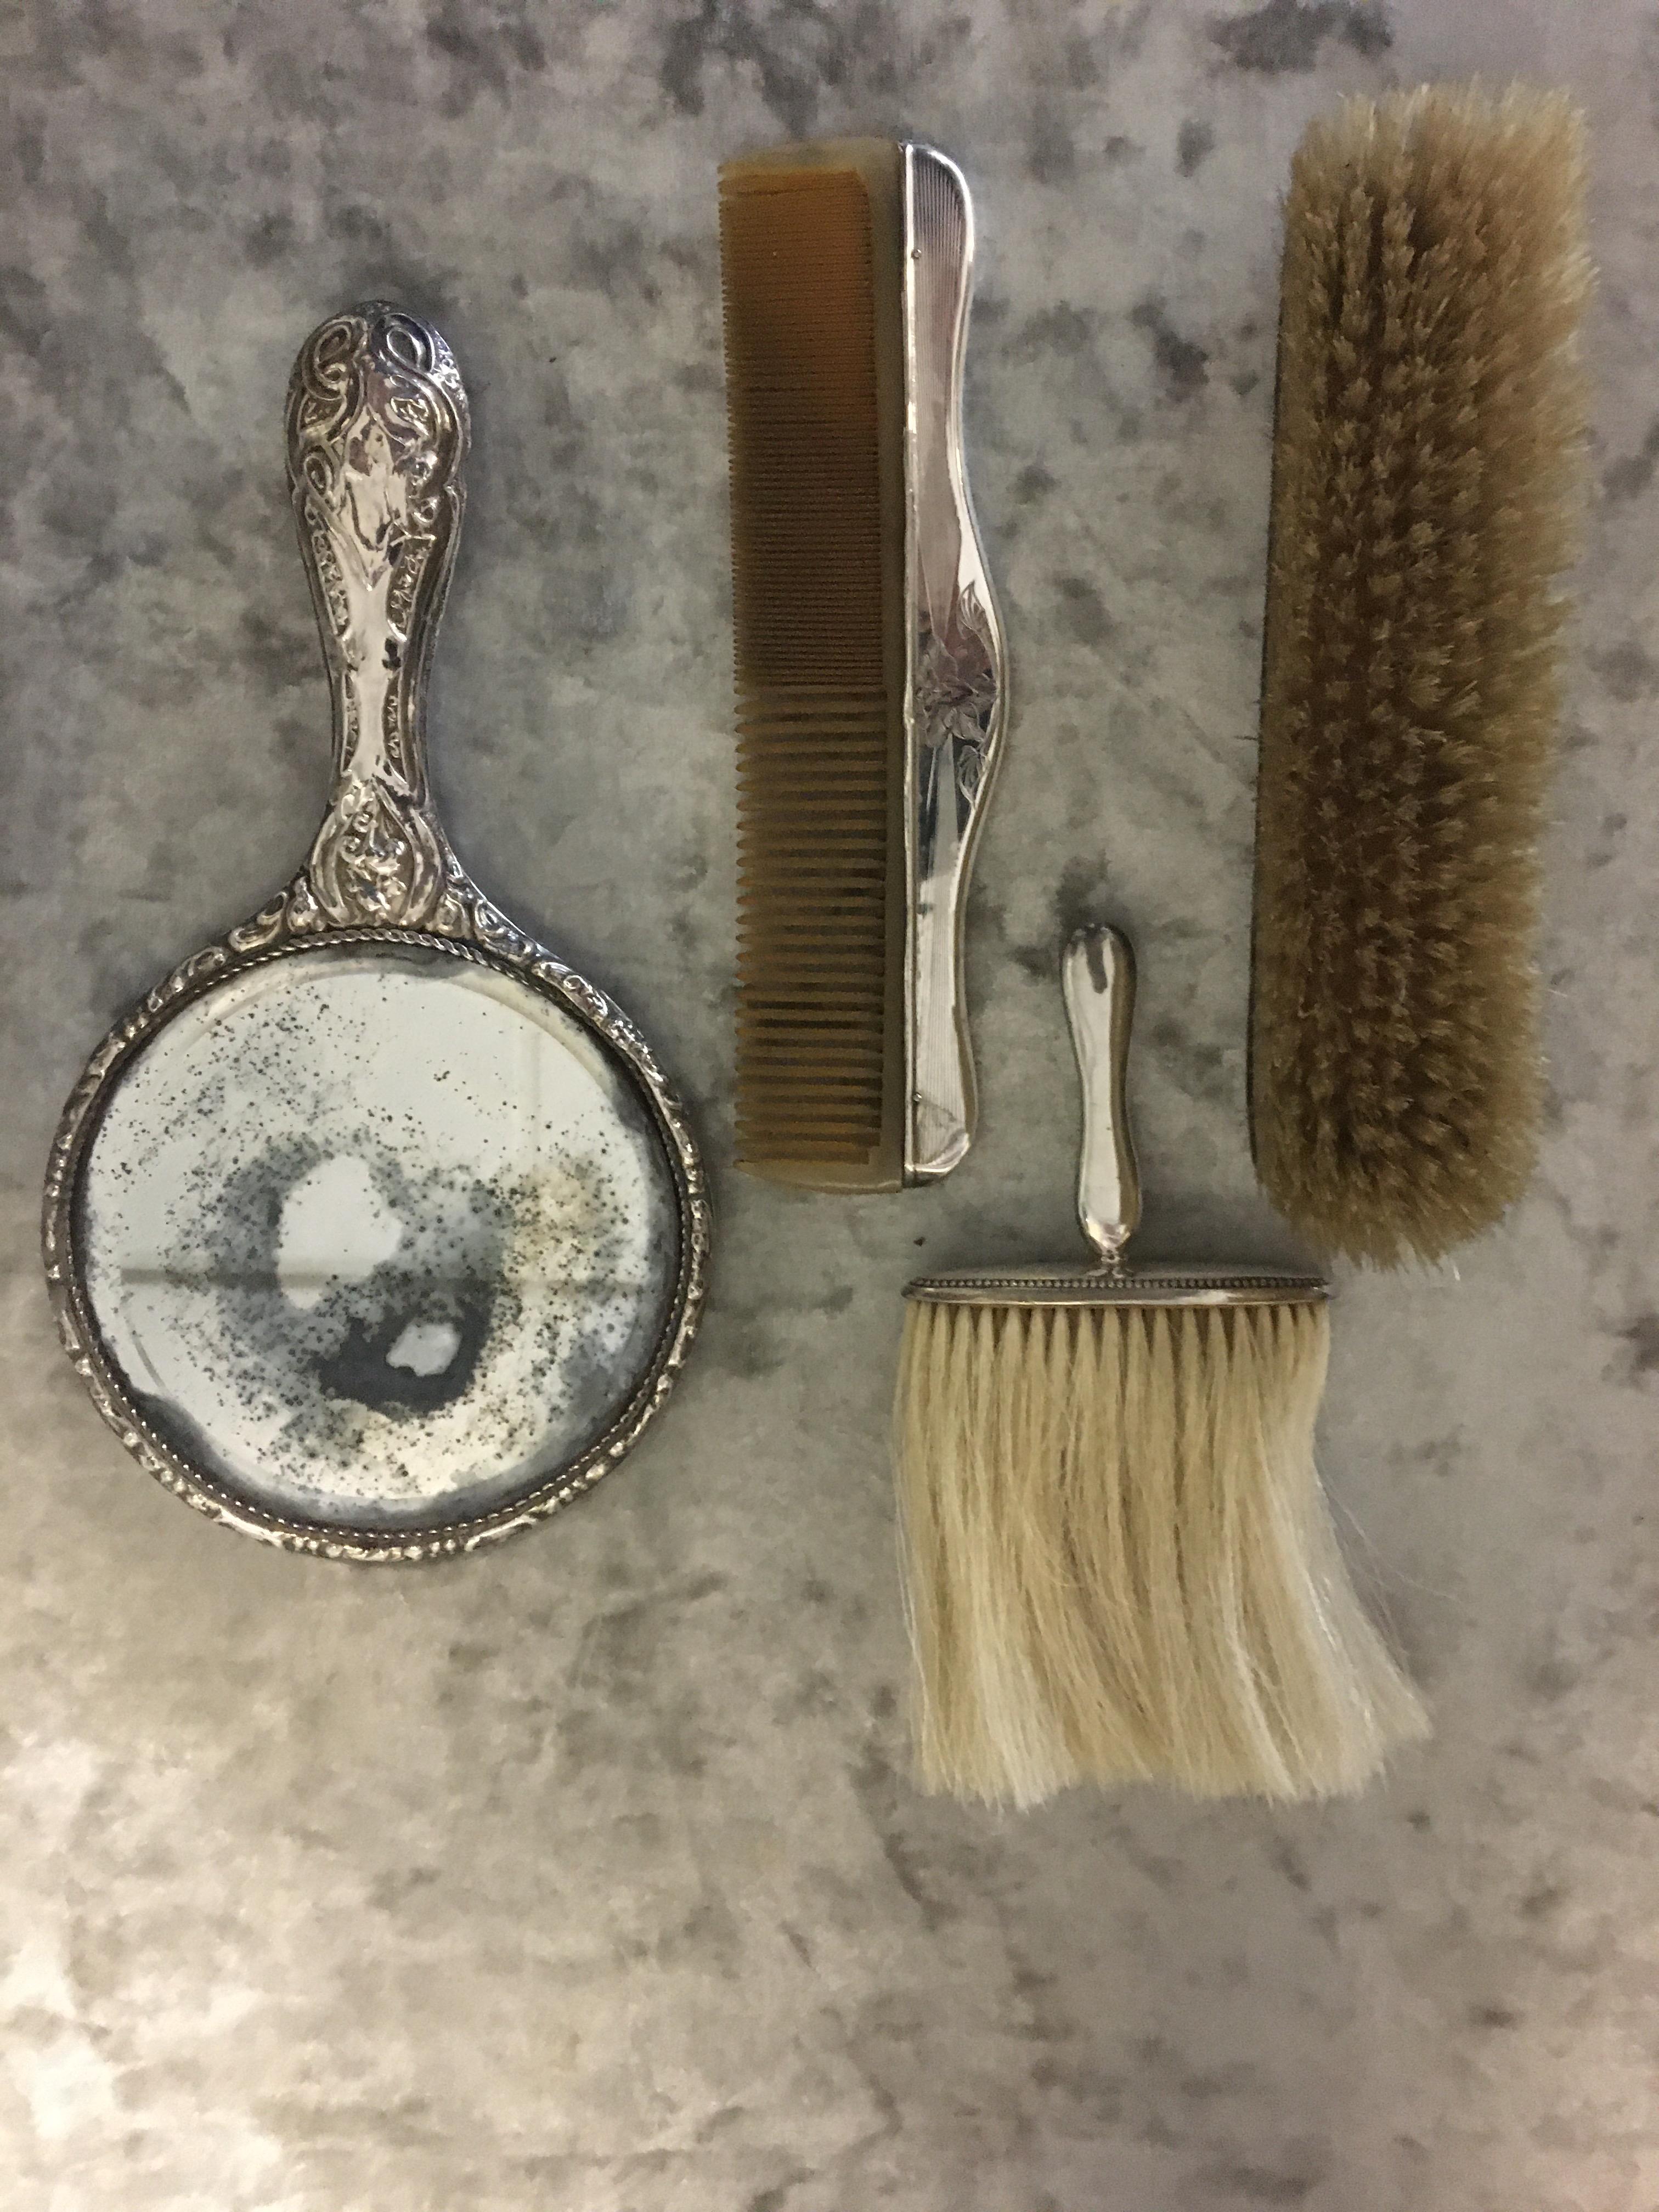 HM Silver brushes, mirror and comb. - Image 3 of 3